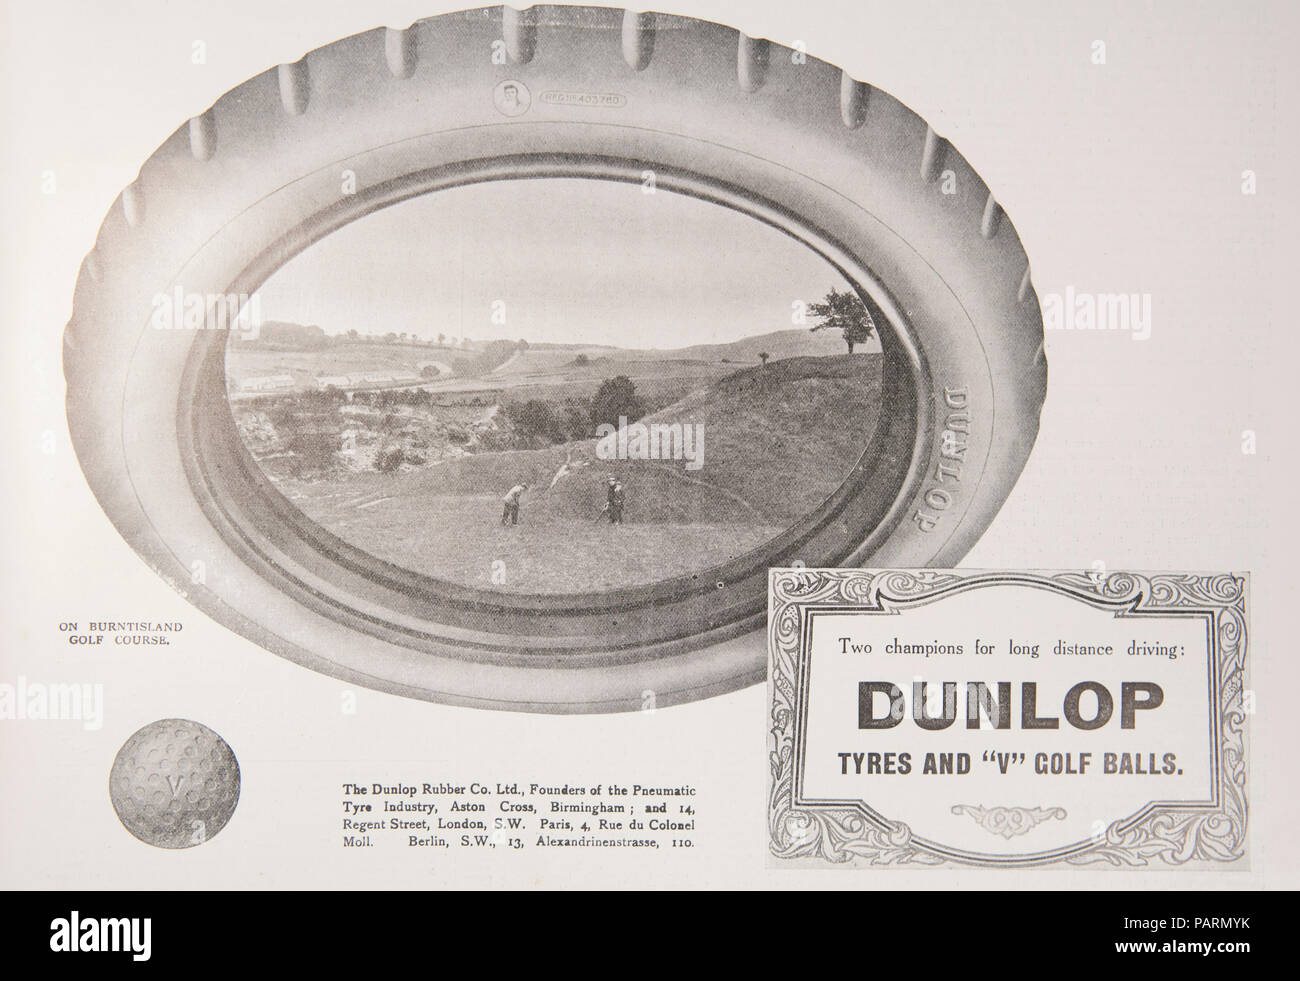 Dunlop tyres and golf ball advert. From an old magazine during the 1914-1918 period. UK GB Stock Photo